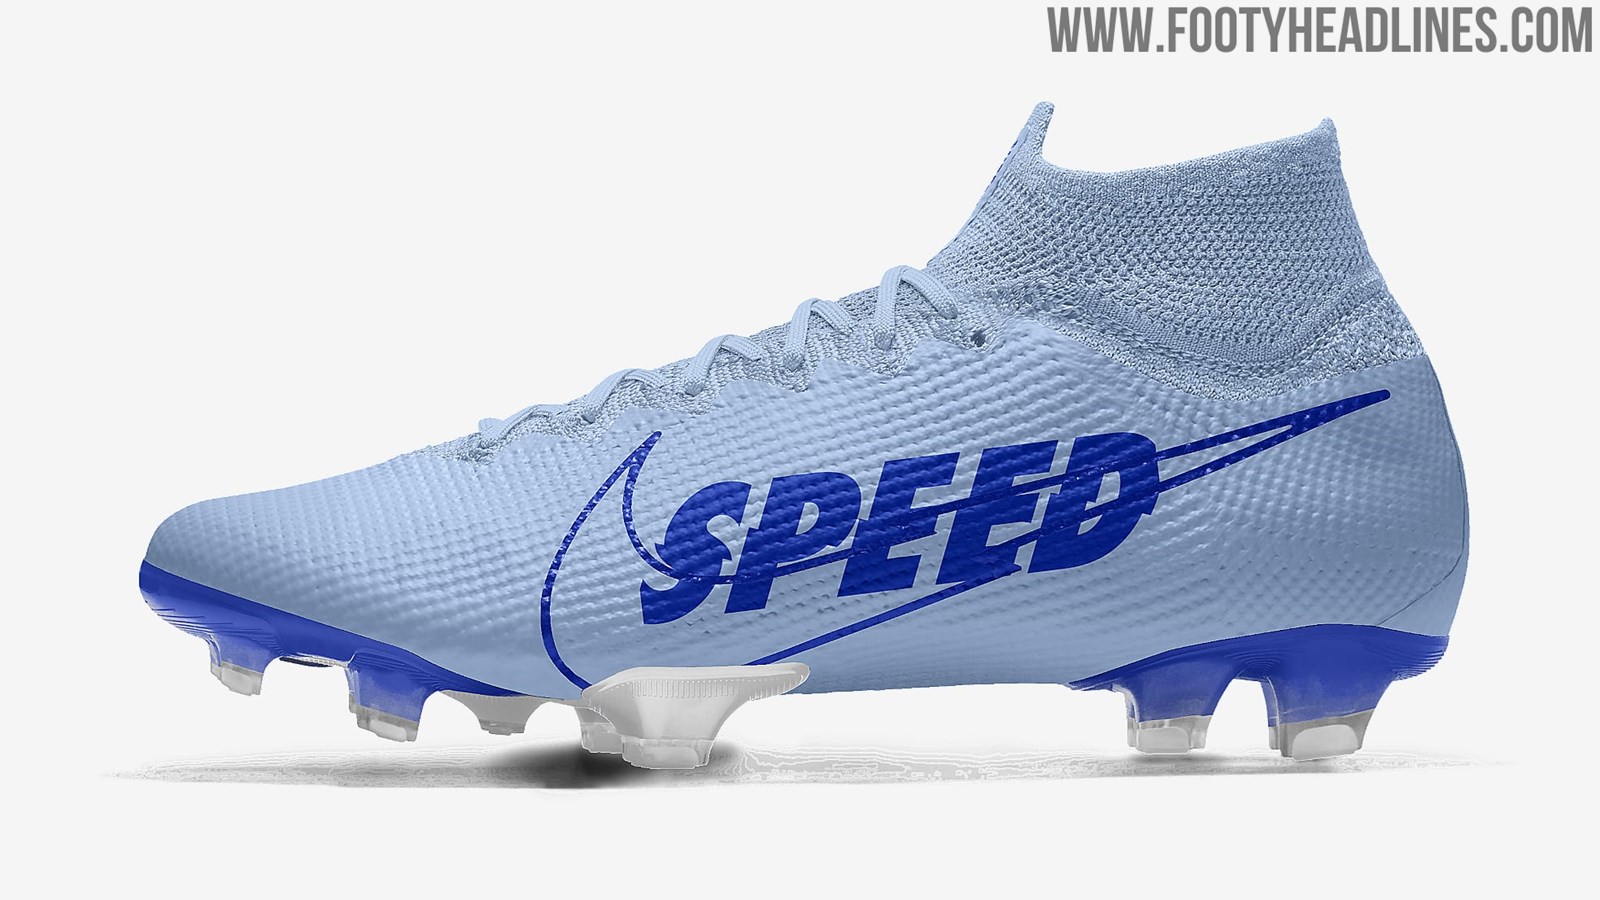 seré fuerte equipaje formal Spectacular Updated "Nike By You" Mercurial Superfly & Vapor Boots Released  - Footy Headlines